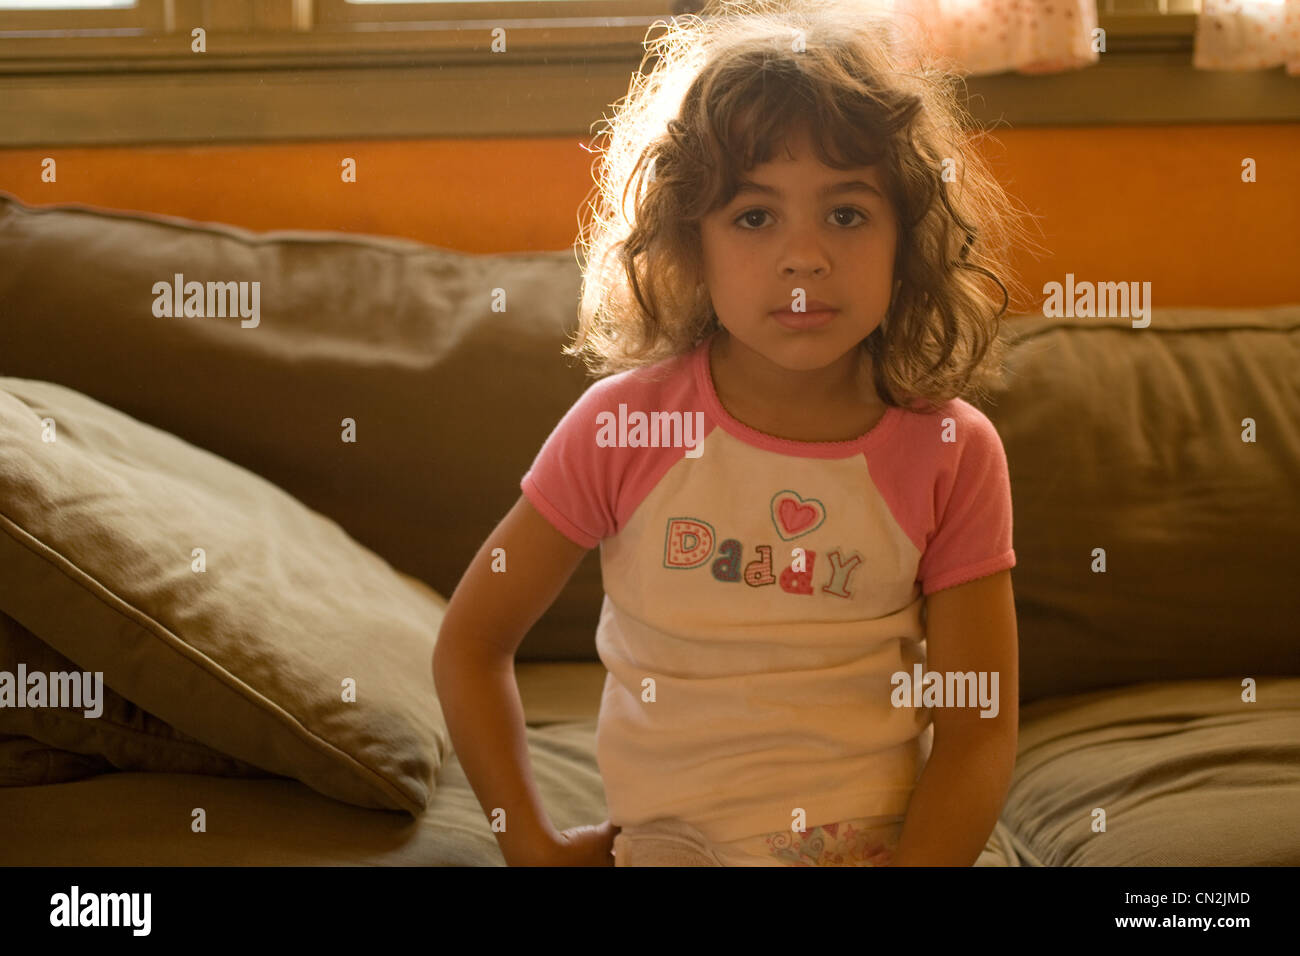 Portrait of young girl sitting on sofa Stock Photo